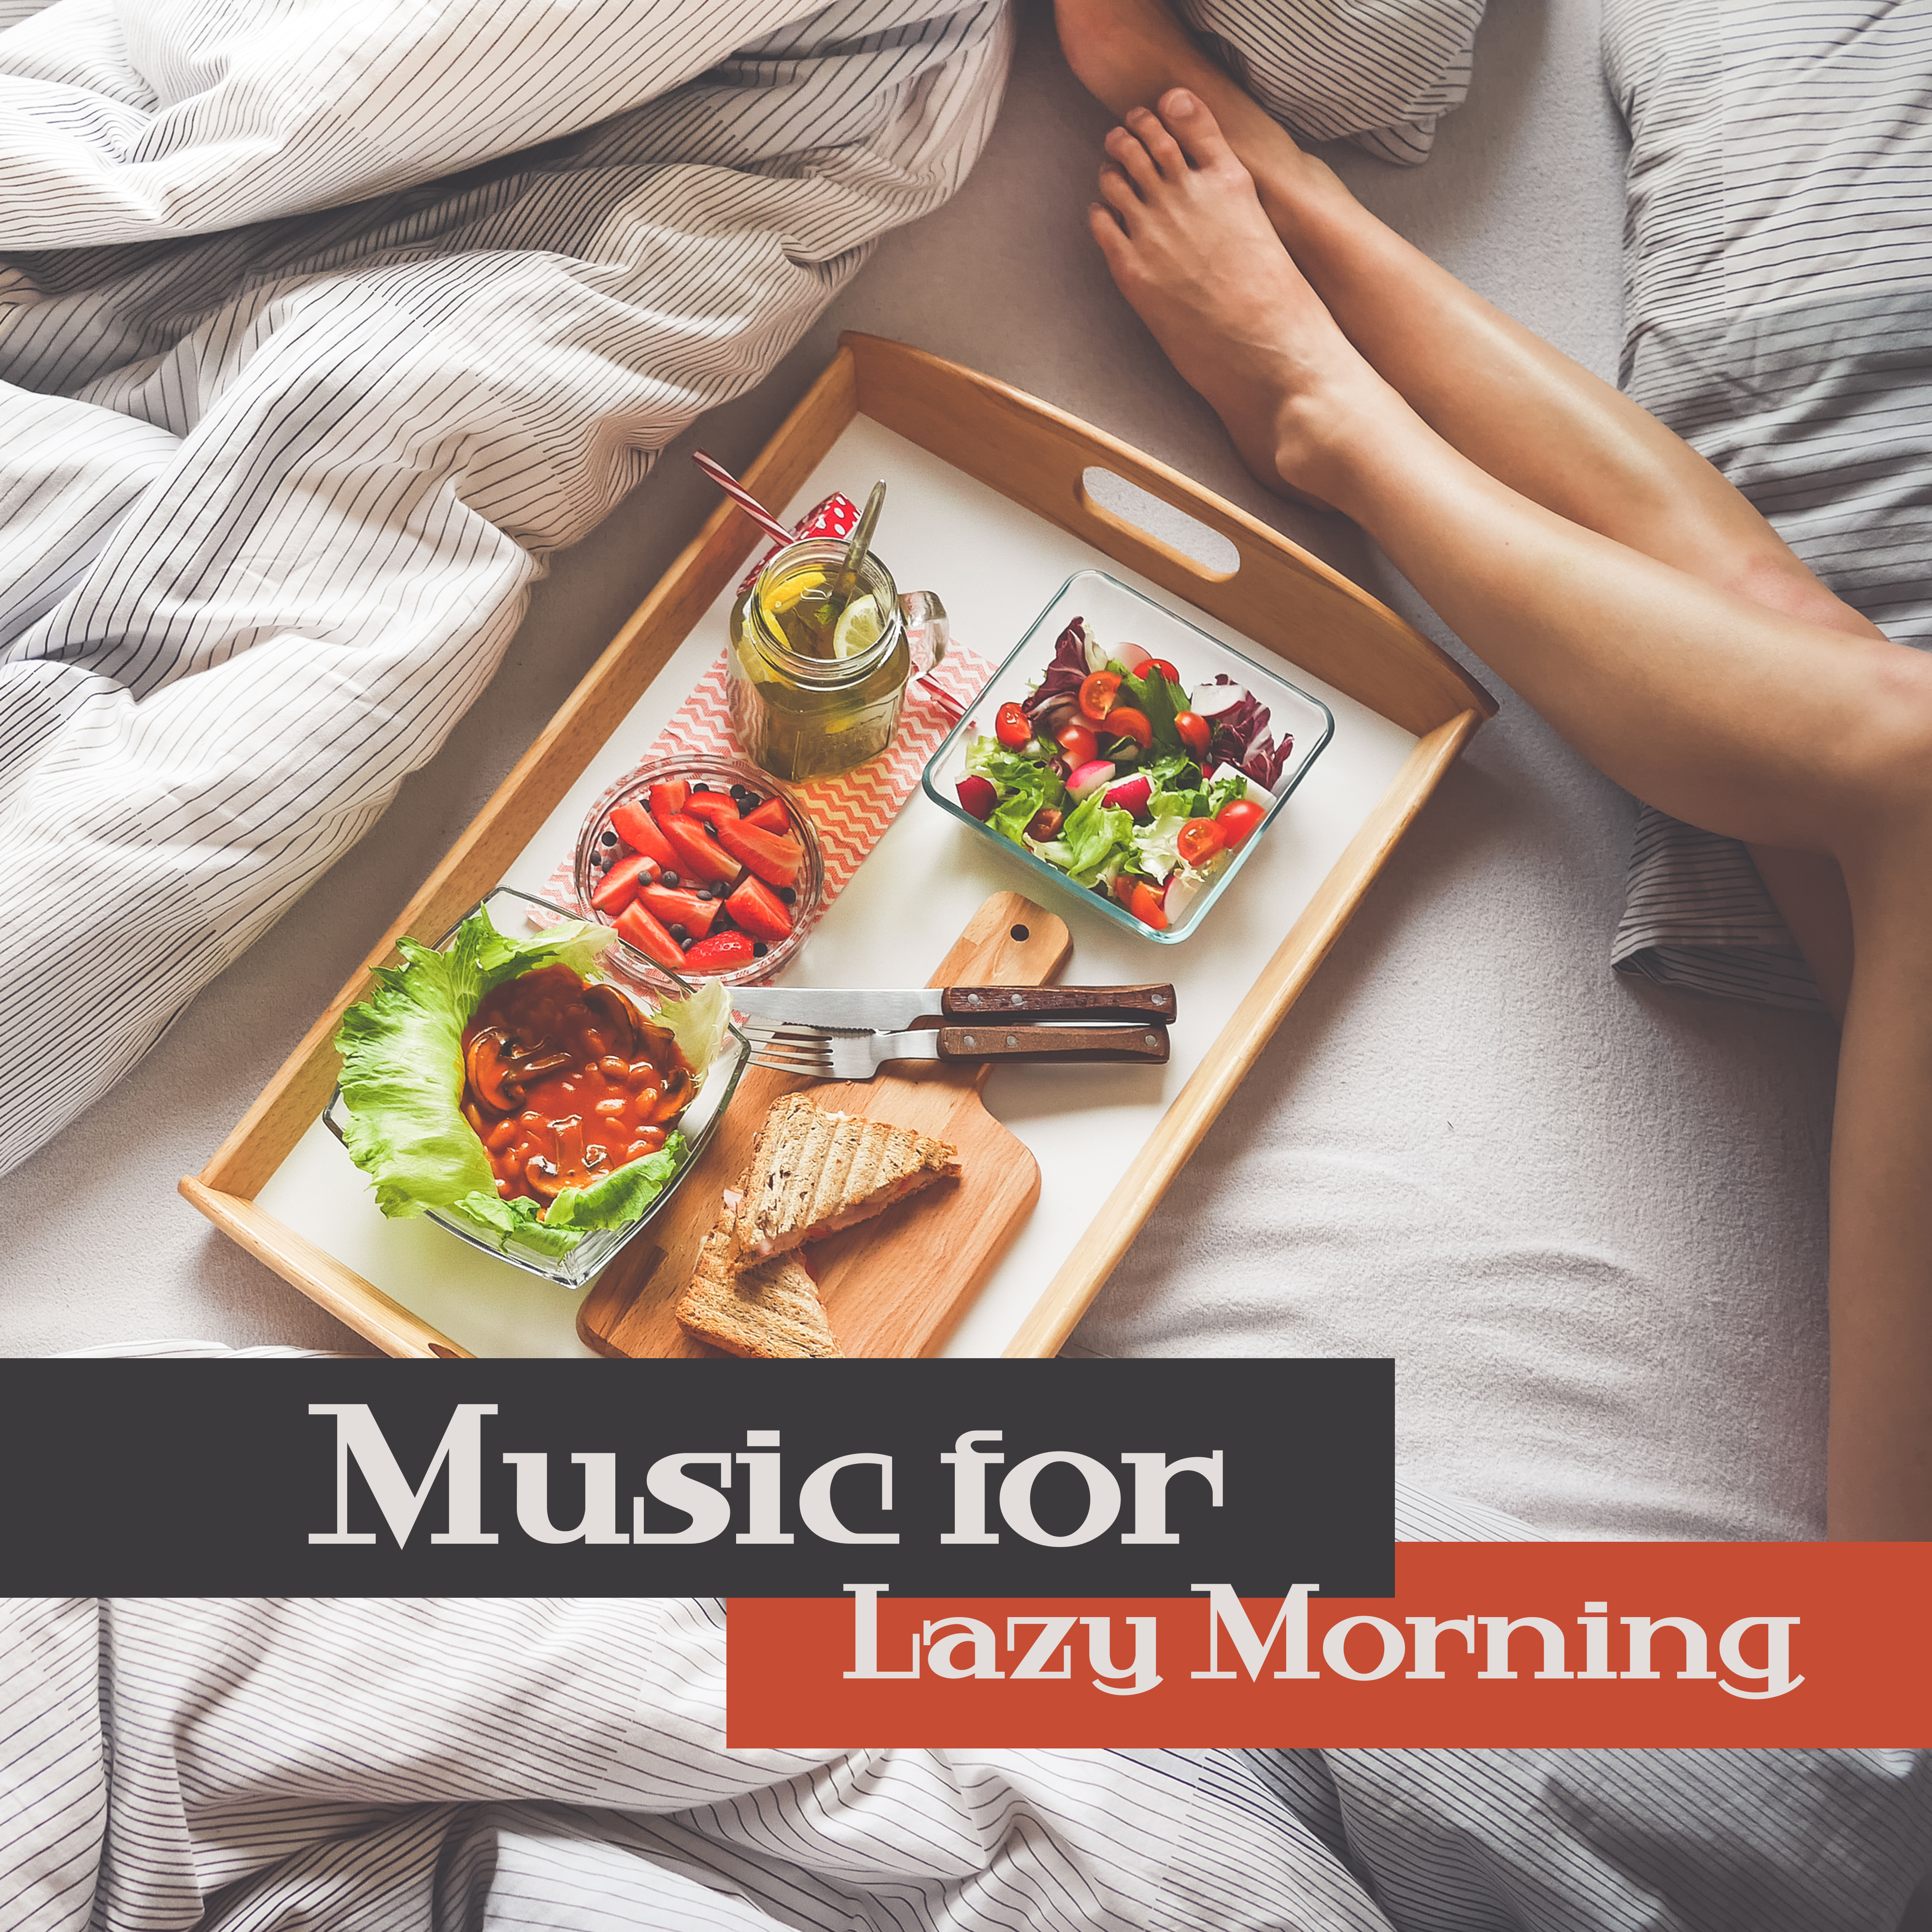 Music for Lazy Morning – Chill Out Memories, Morning Chillout, Summertime Relaxation, Rest a Bit